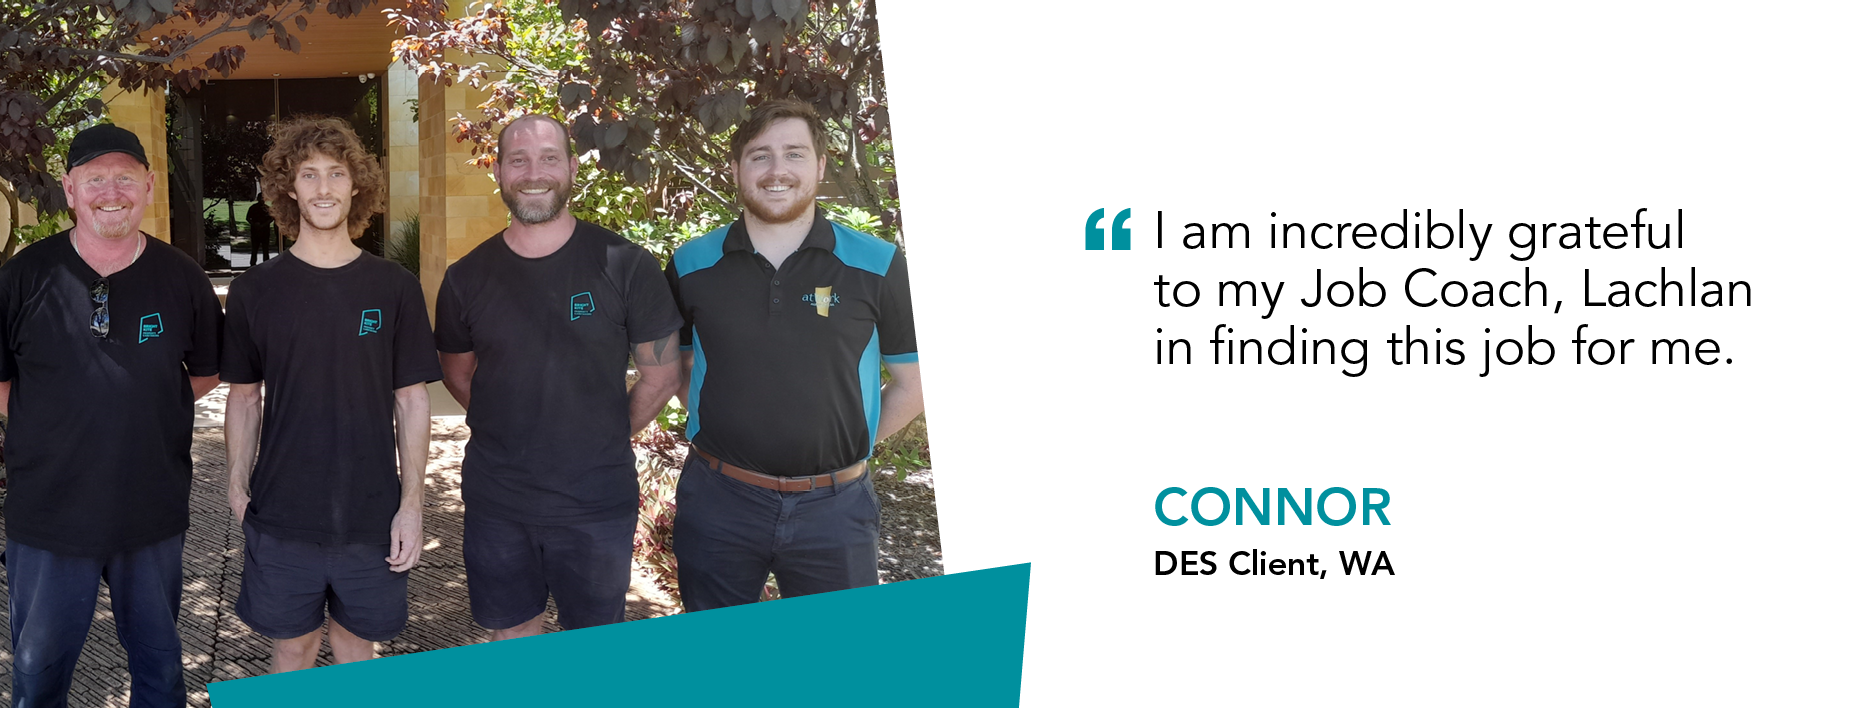 "I am incredibly grateful to my Job Coach, Lachlan in finding this job for me" Connor, DES Client, WA